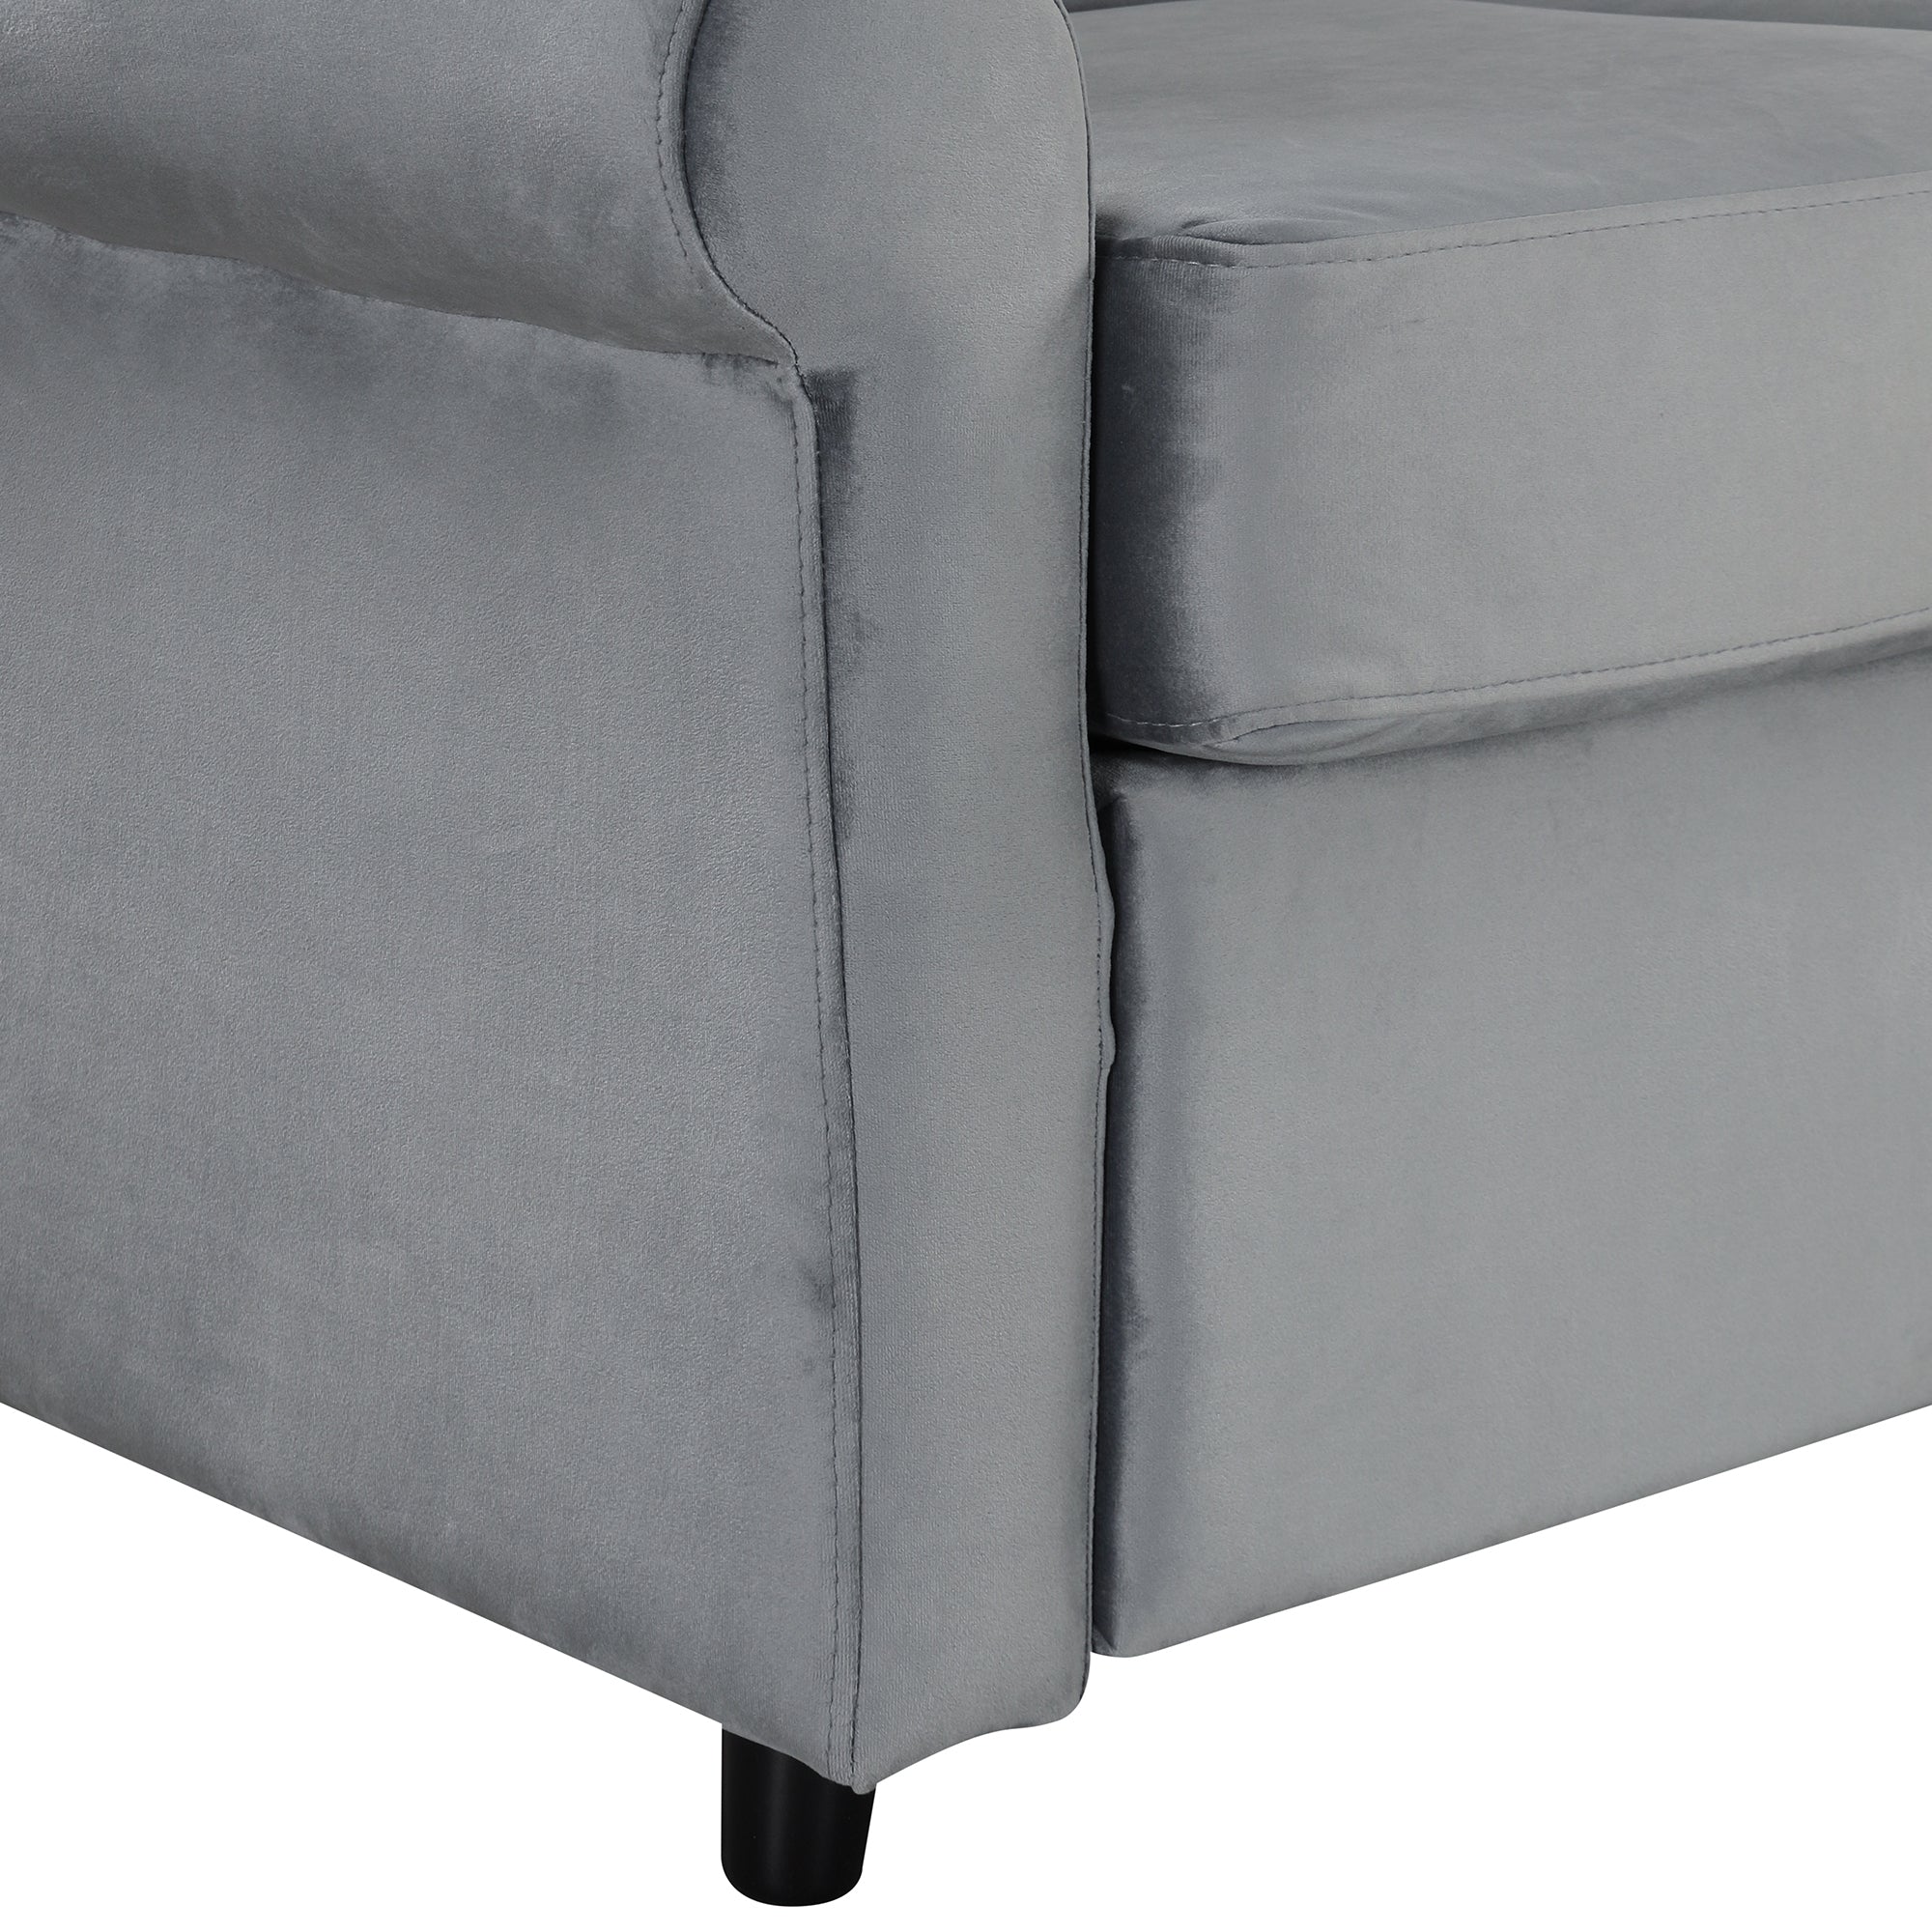 57.4" Pull Out Sofa Bed,Sleeper Sofa Bed with Premium gray-foam-velvet